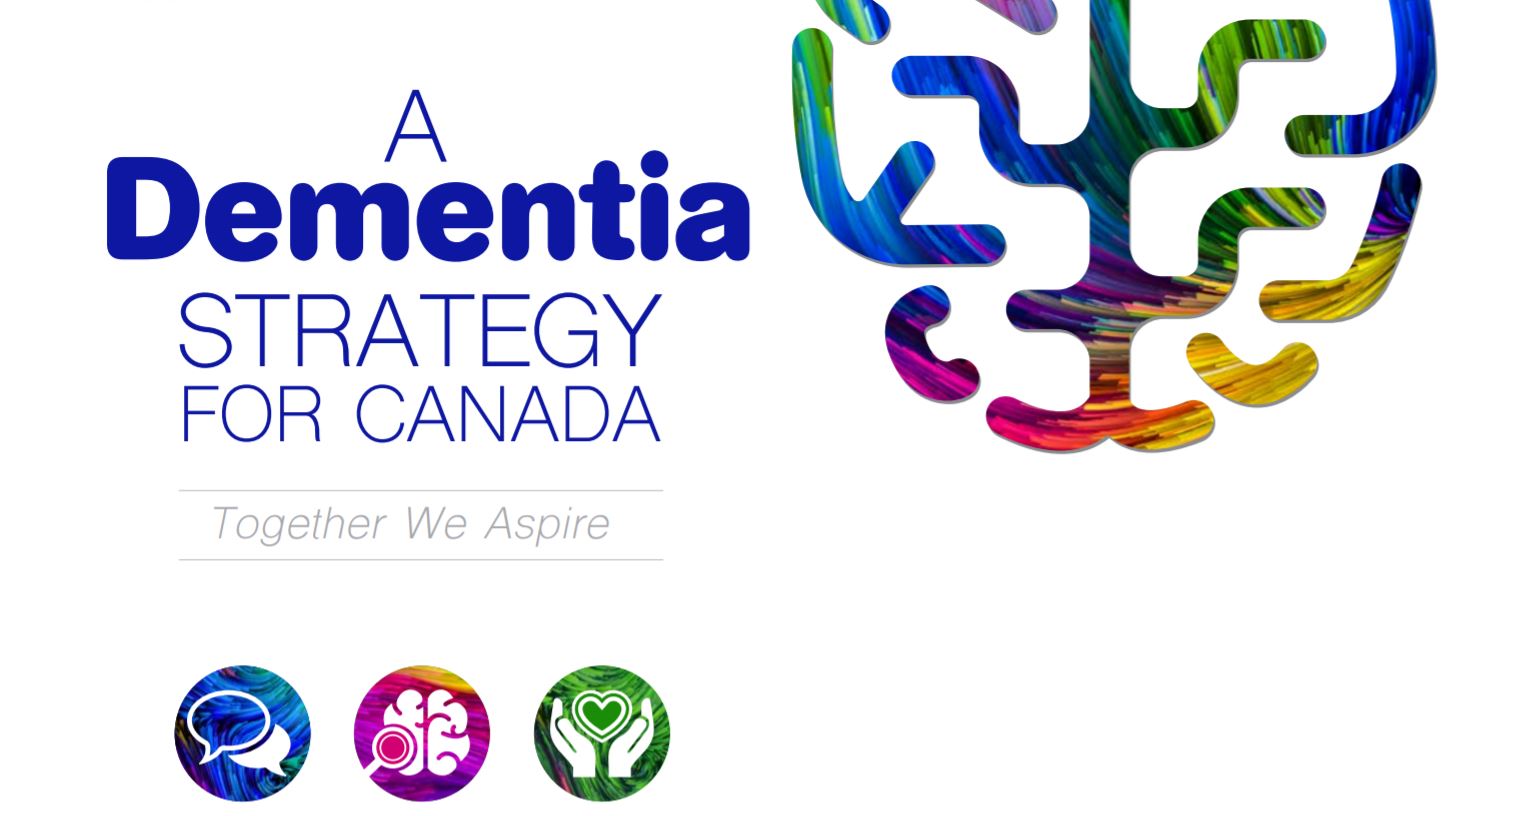 A National Dementia Strategy for Canada